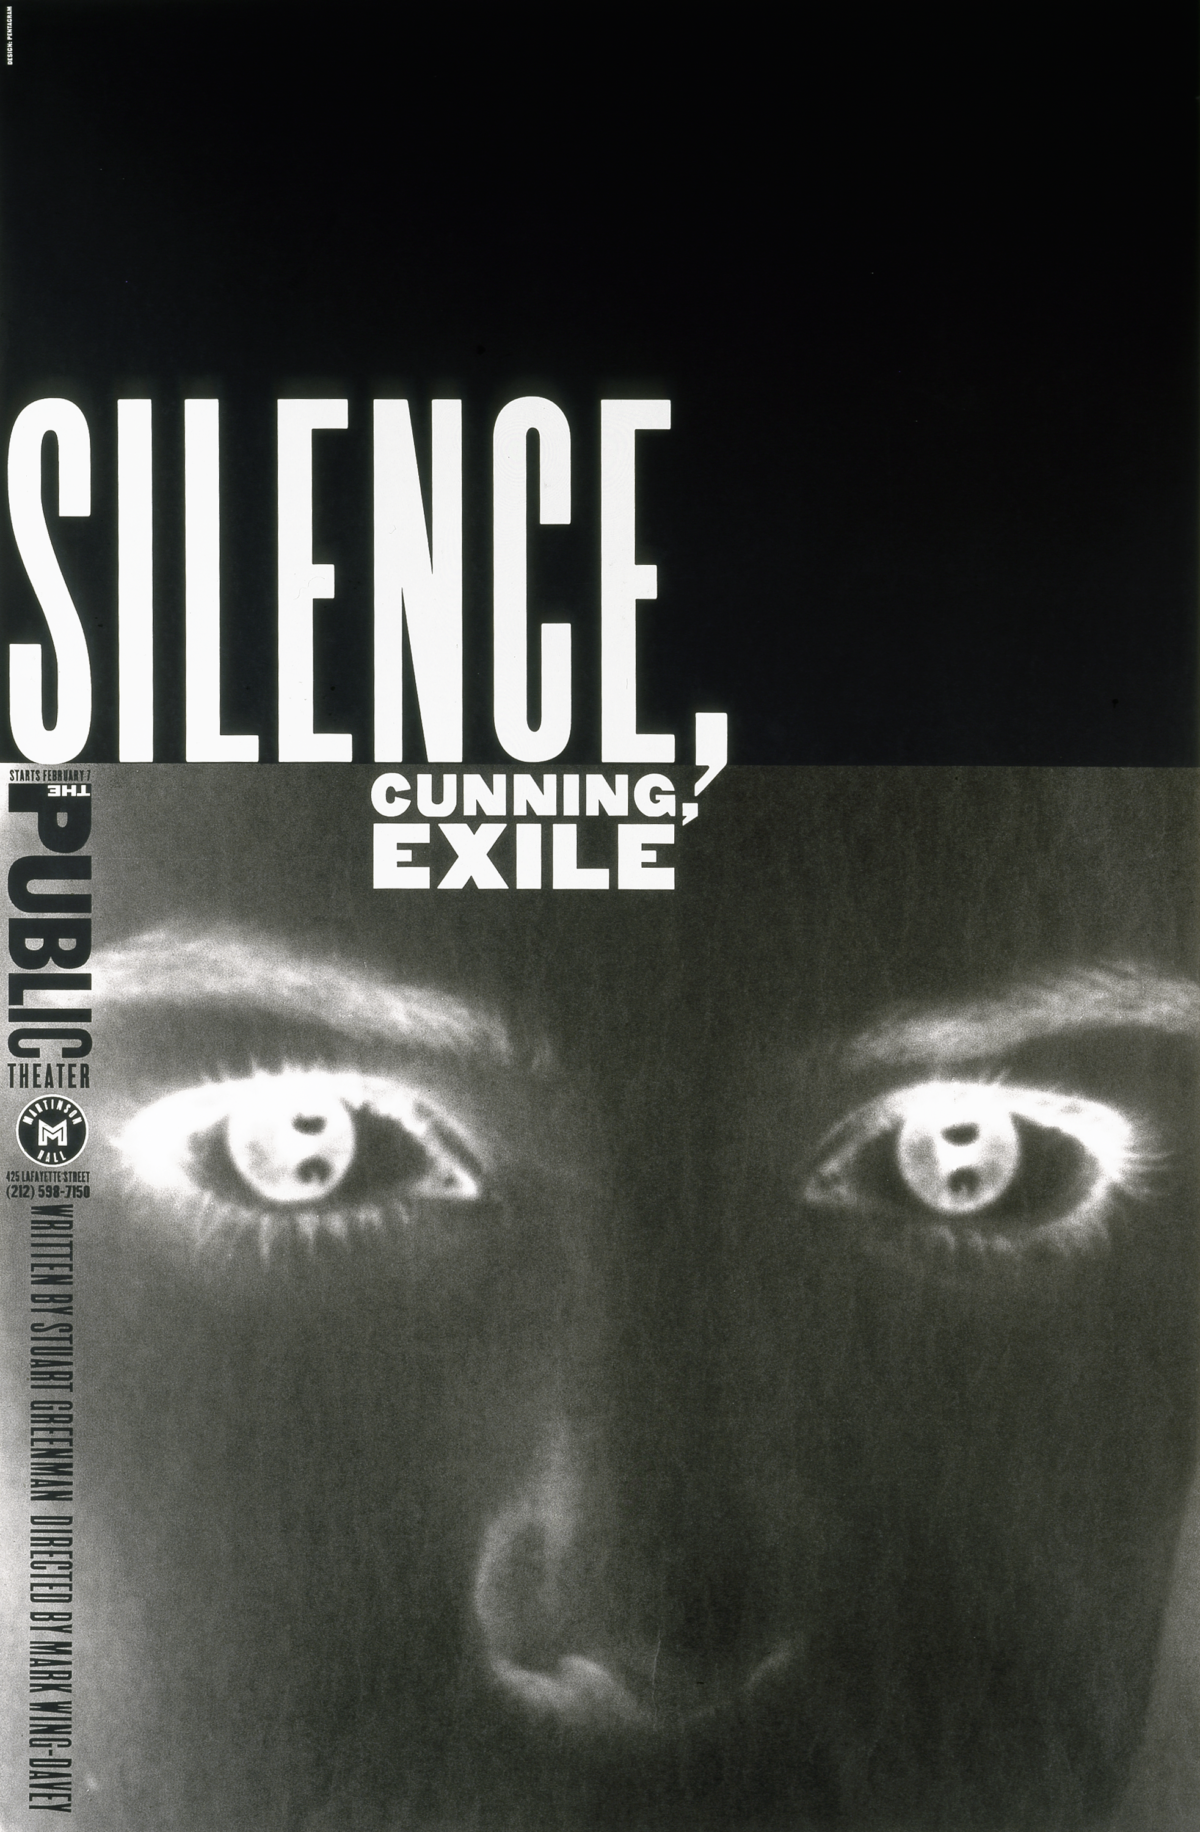 3.-Silence-Cunning-Exile